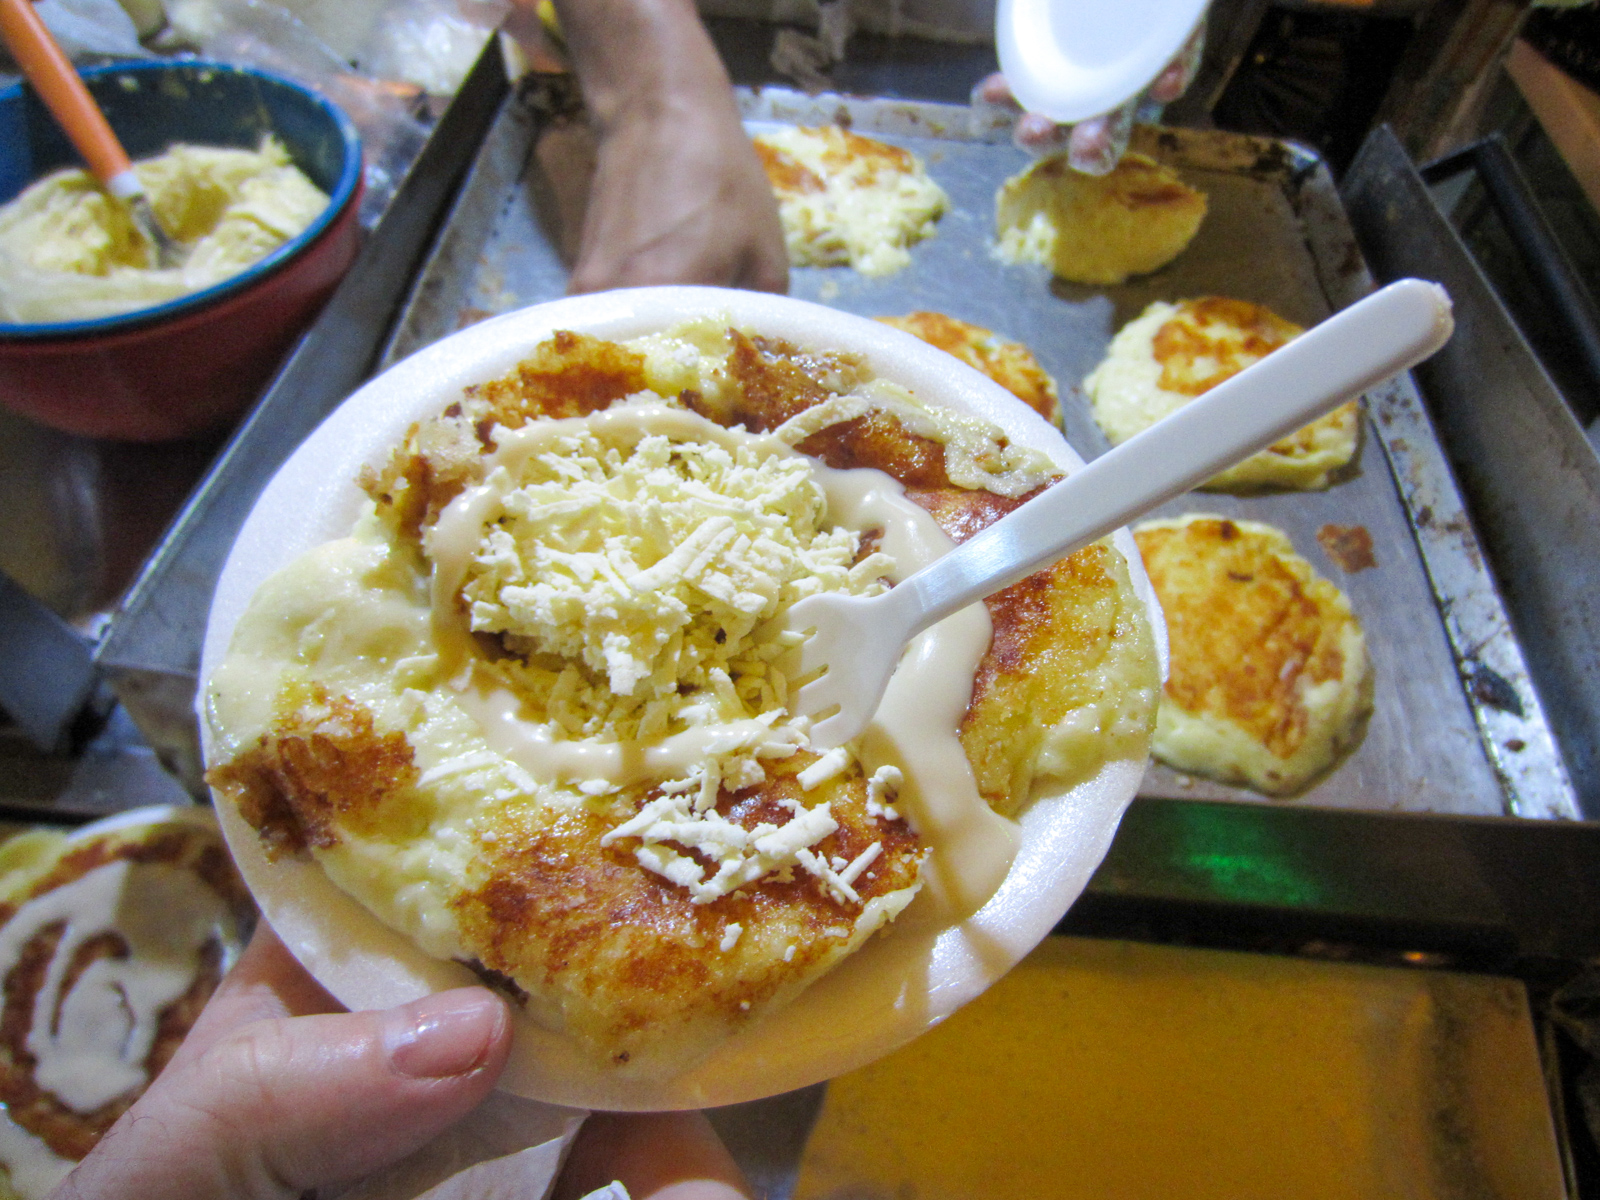 Street arepa with cheese and condensed milk